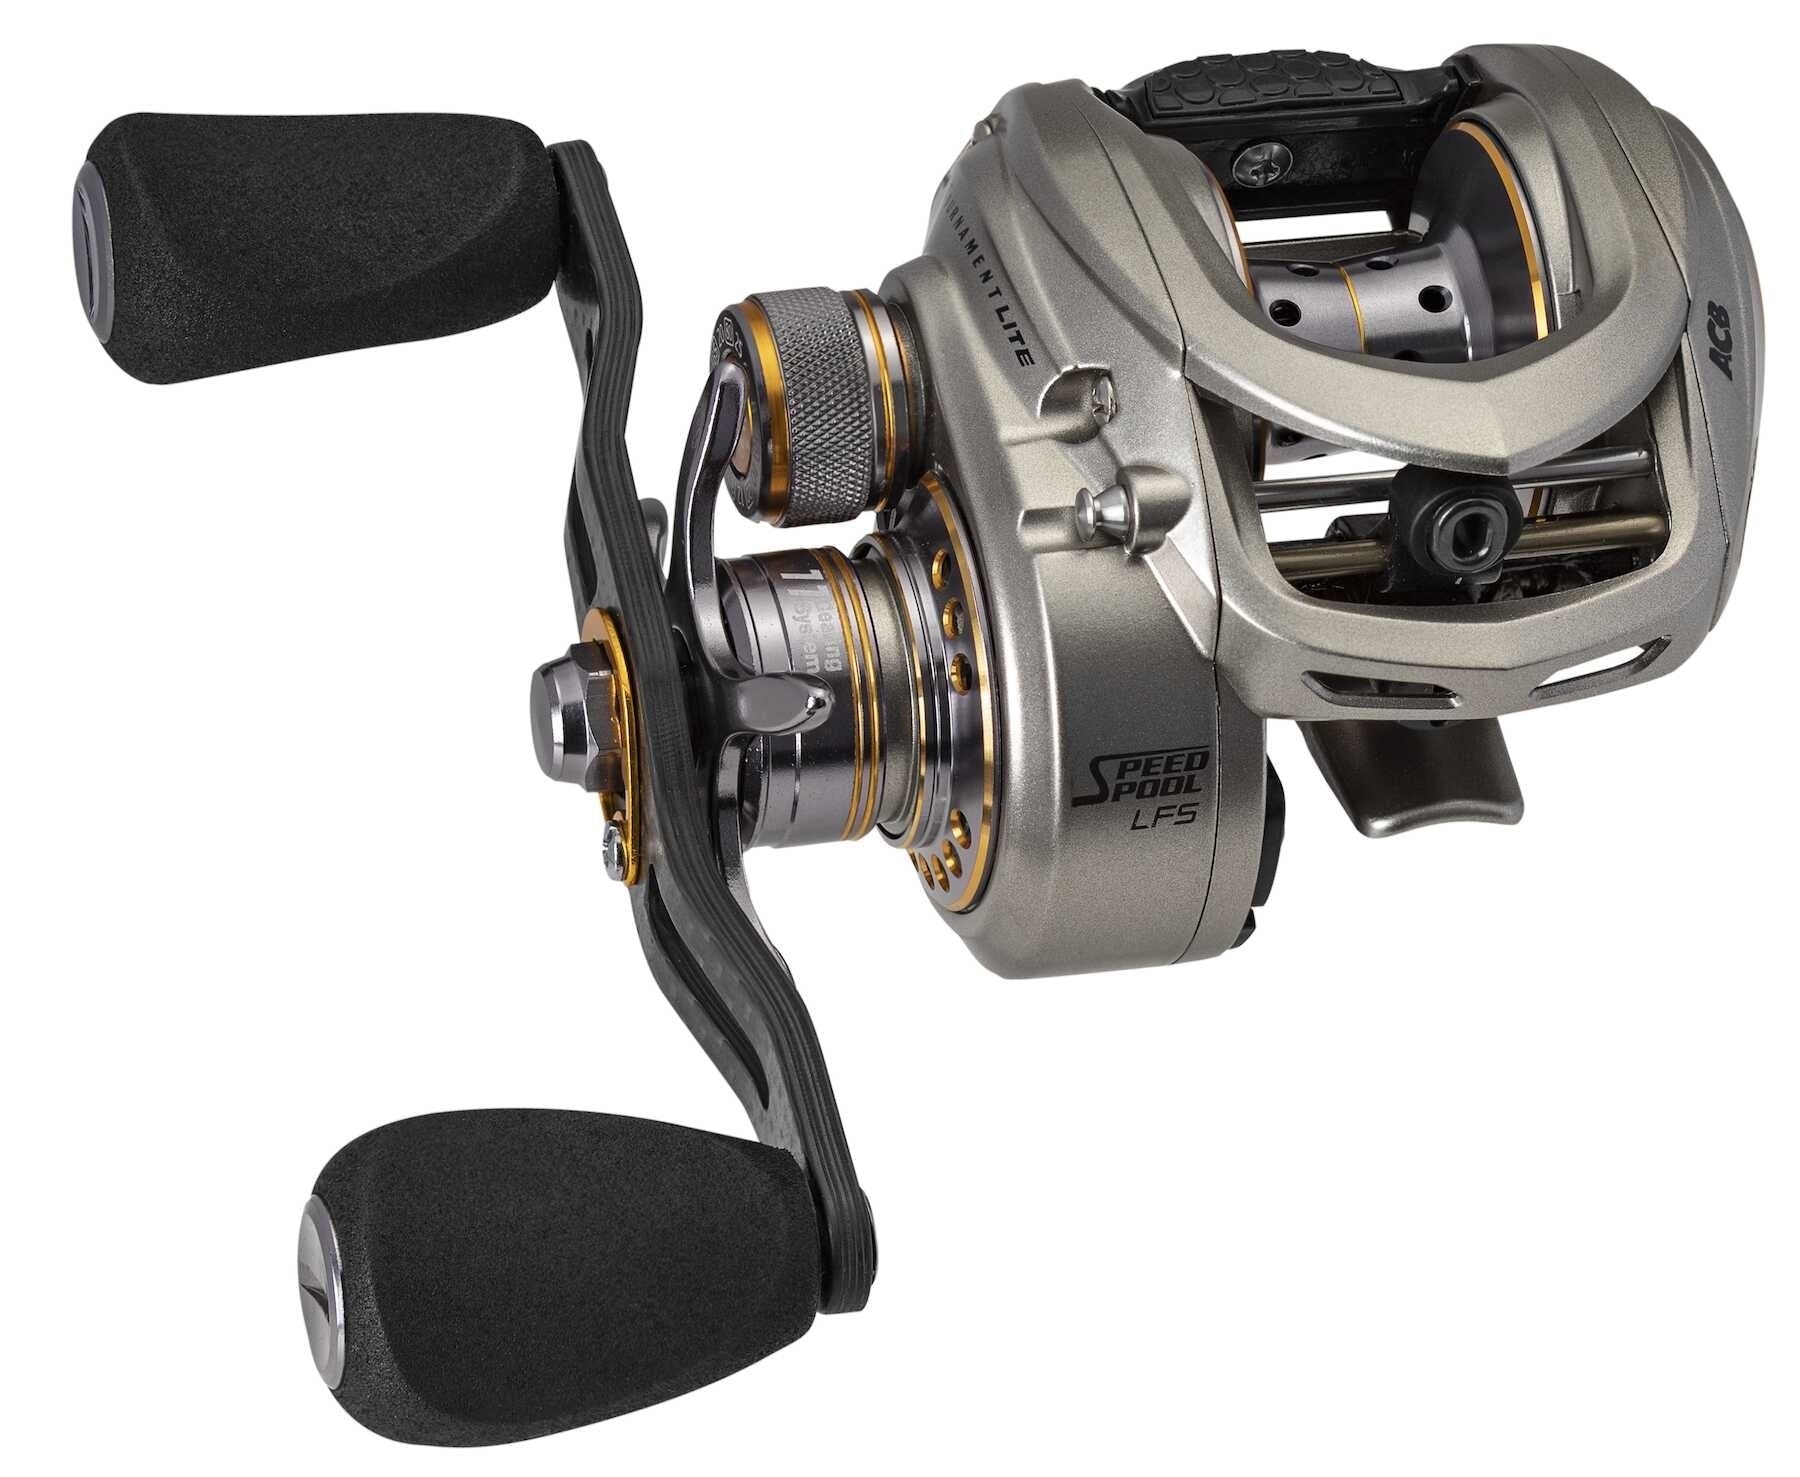 Buy lews baitcasting reels combo Online in INDIA at Low Prices at desertcart